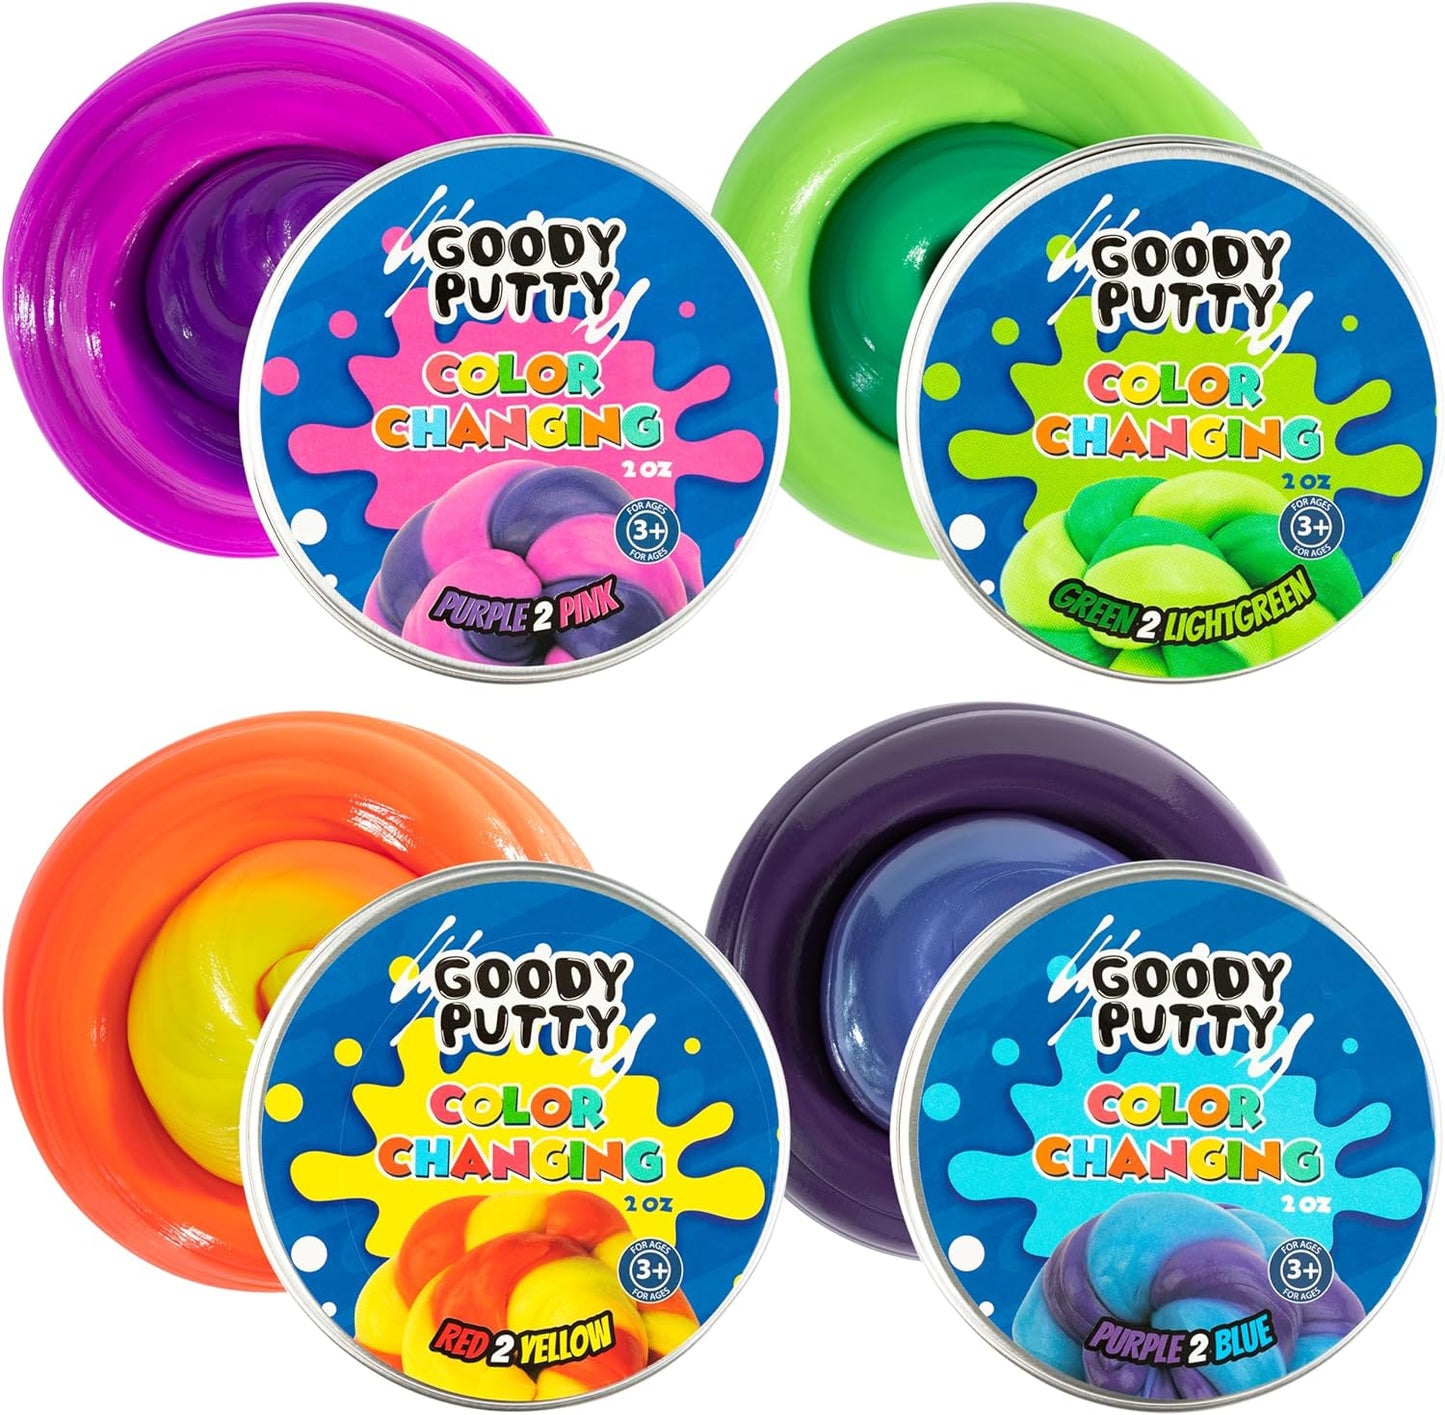 Heat Sensitive Color Changing 4 Pack Great Slime Toy for Kids Stress Relief and Kids Therapy and Great ADHD Fidget Toy Pack of Putty That Changes Colors